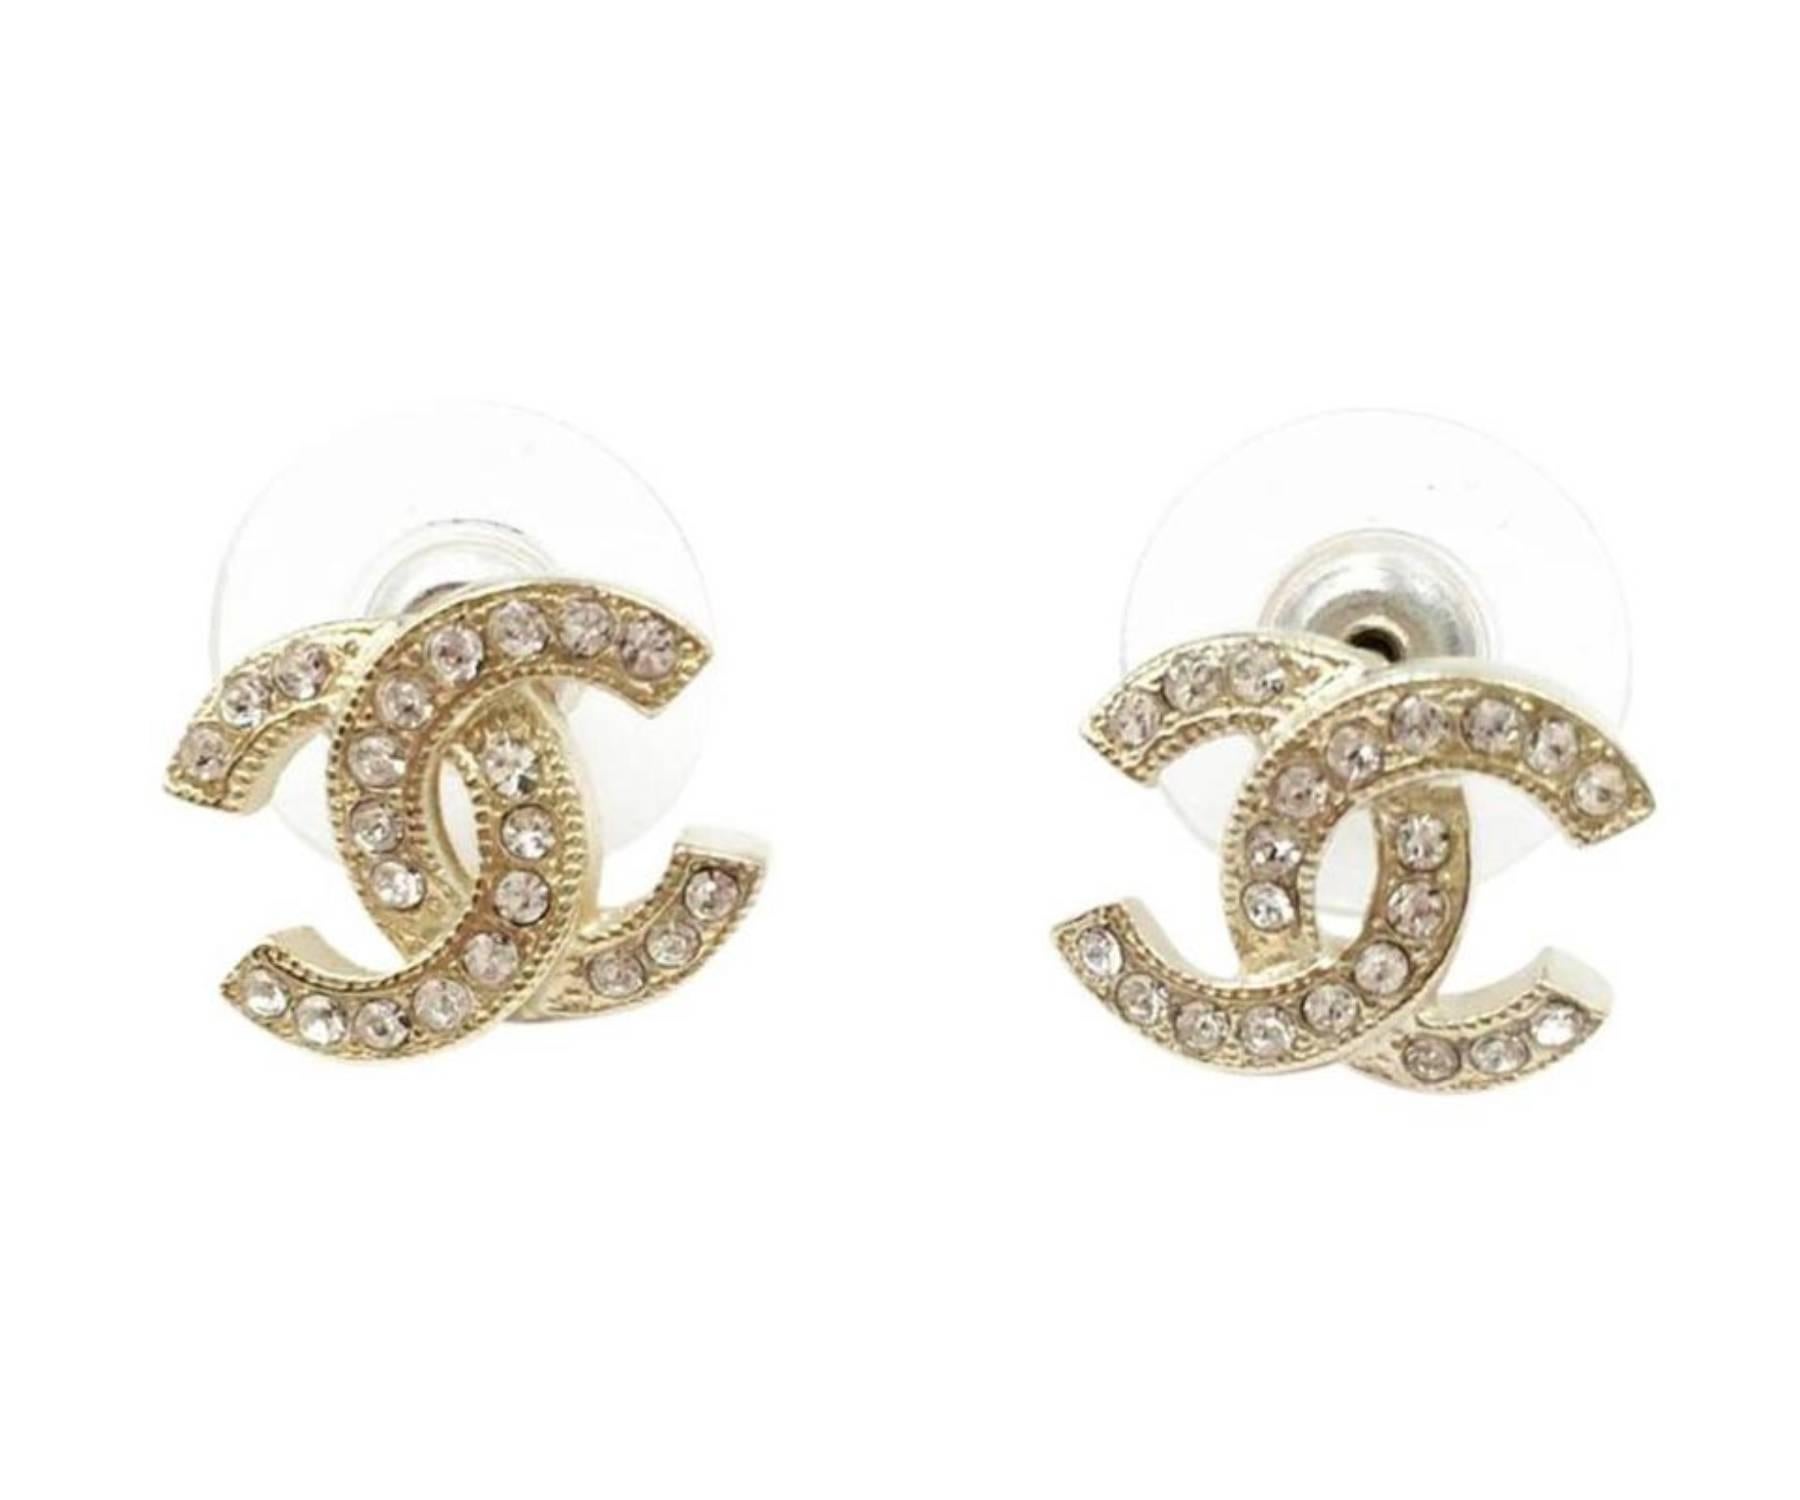 Chanel Classic Gold CC Crystal Reissued Small Piercing Earrings

* Marked 17
* Made in France
* Comes with the original box

-It is approximately 0.5